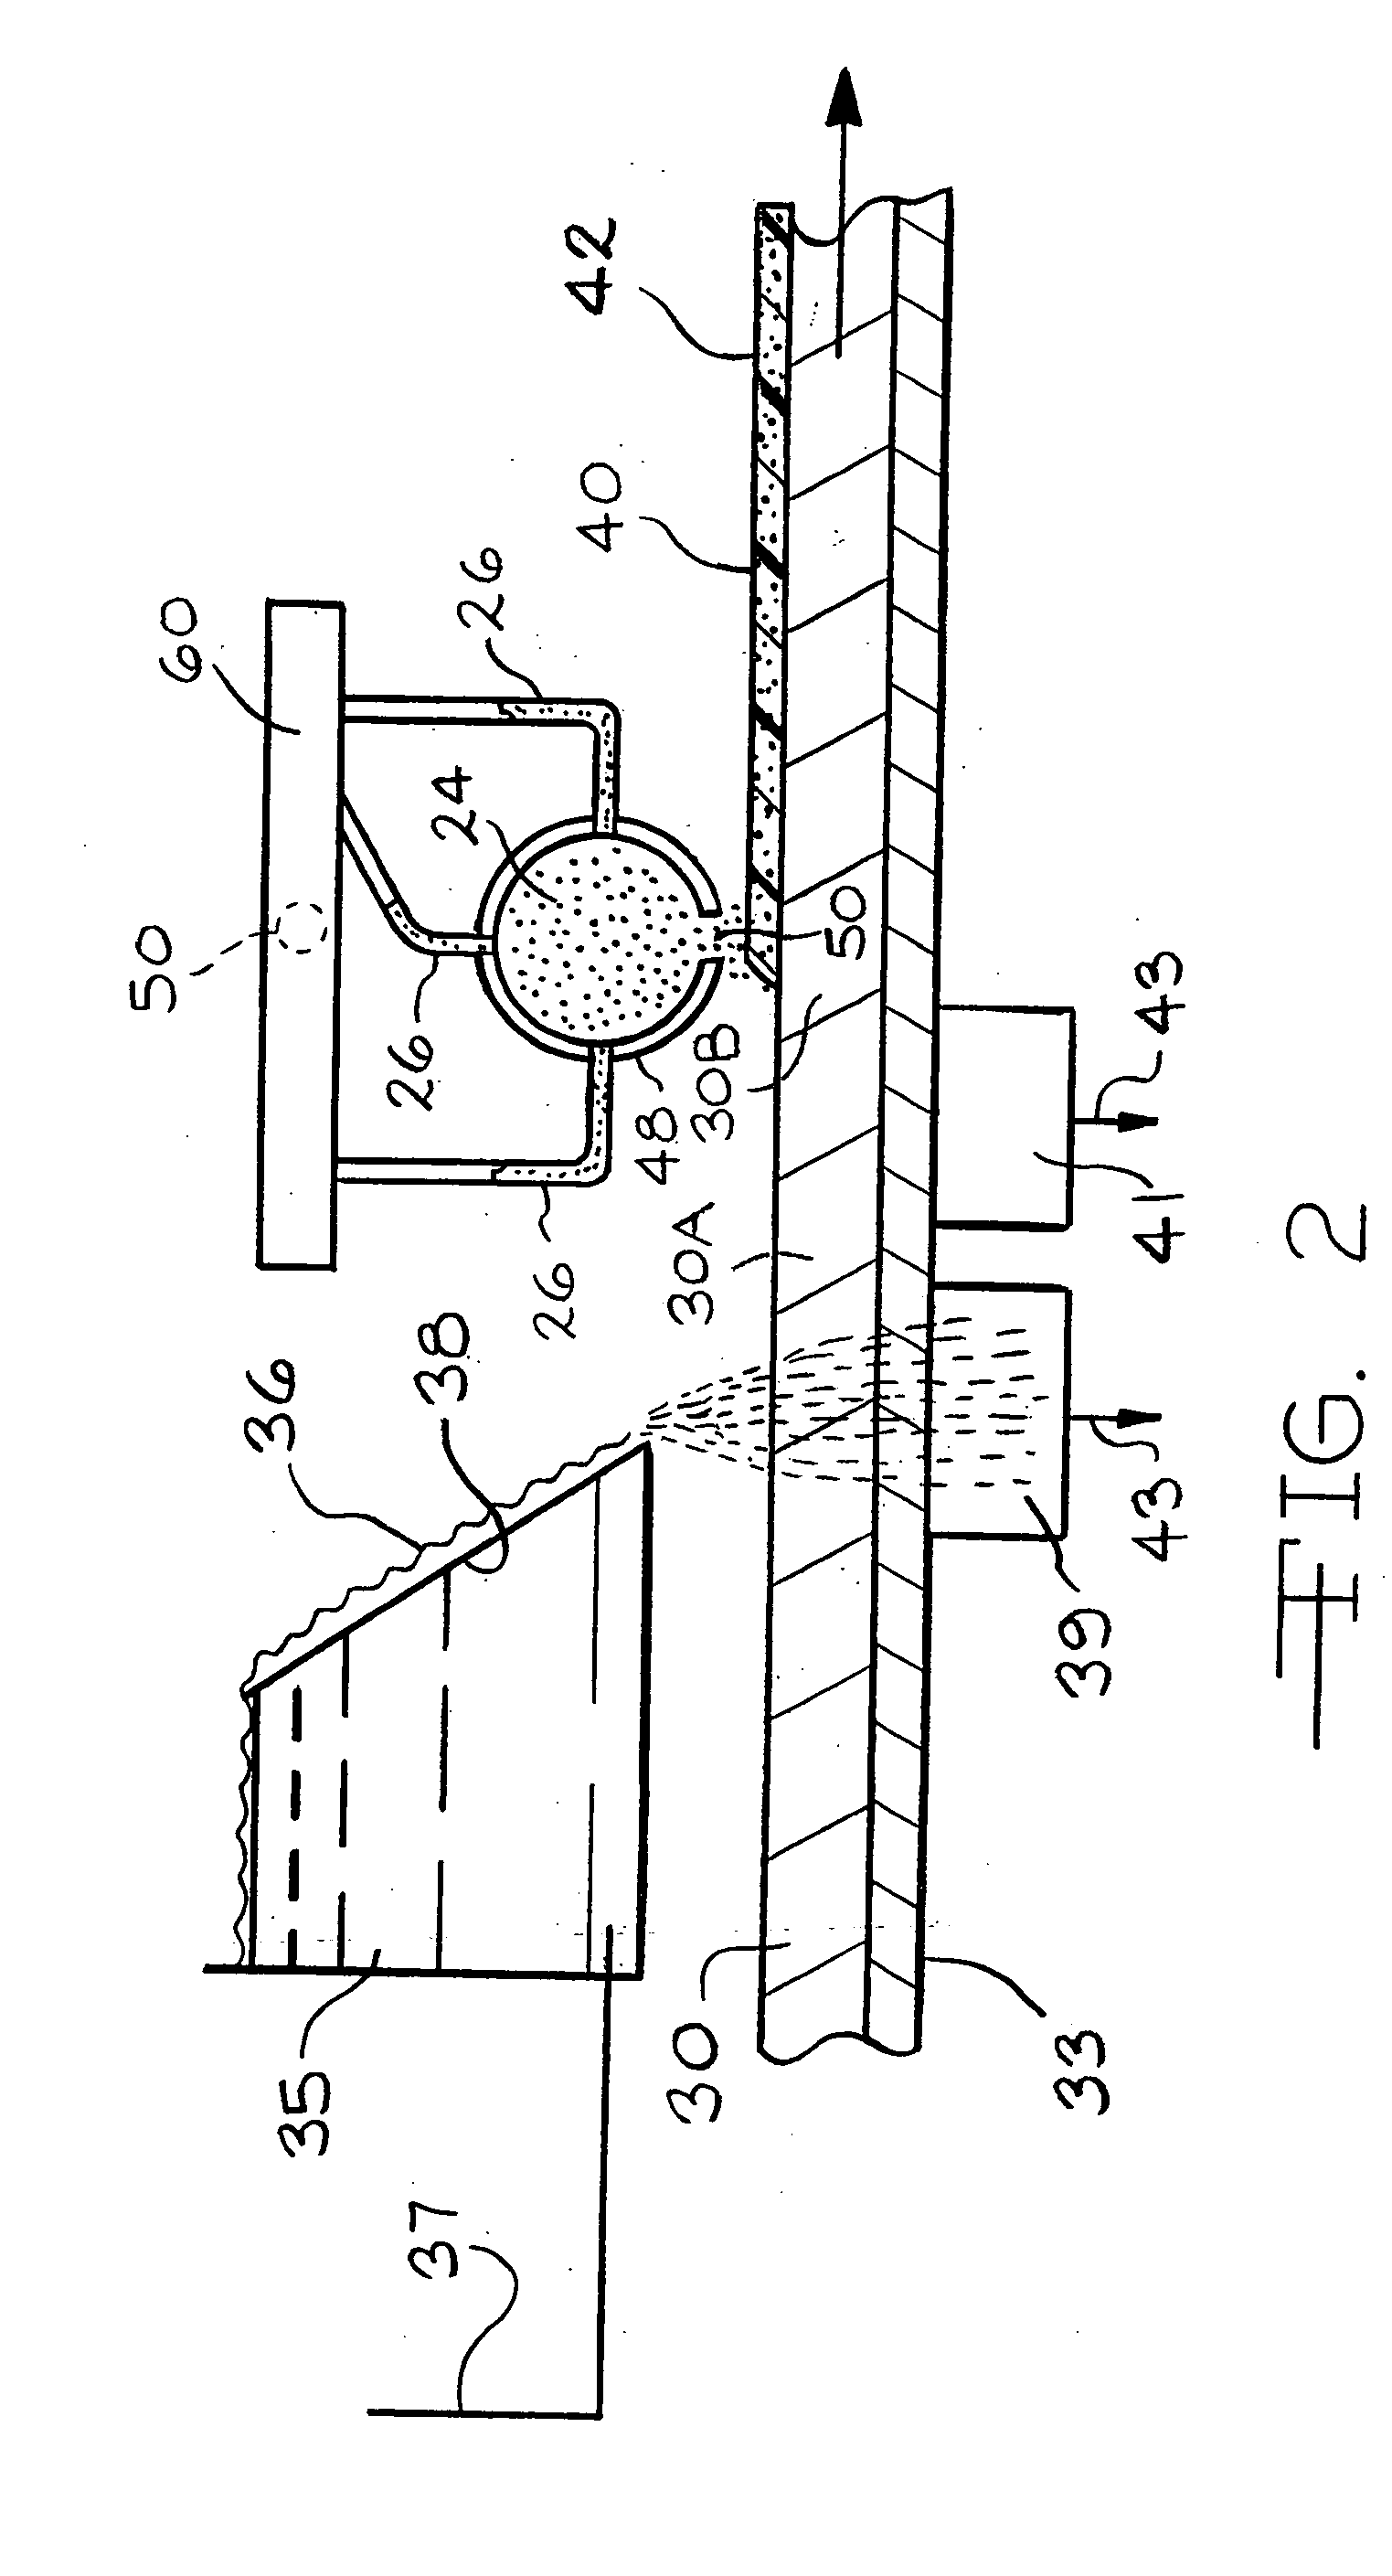 Method of making coated mat online and coated mat products